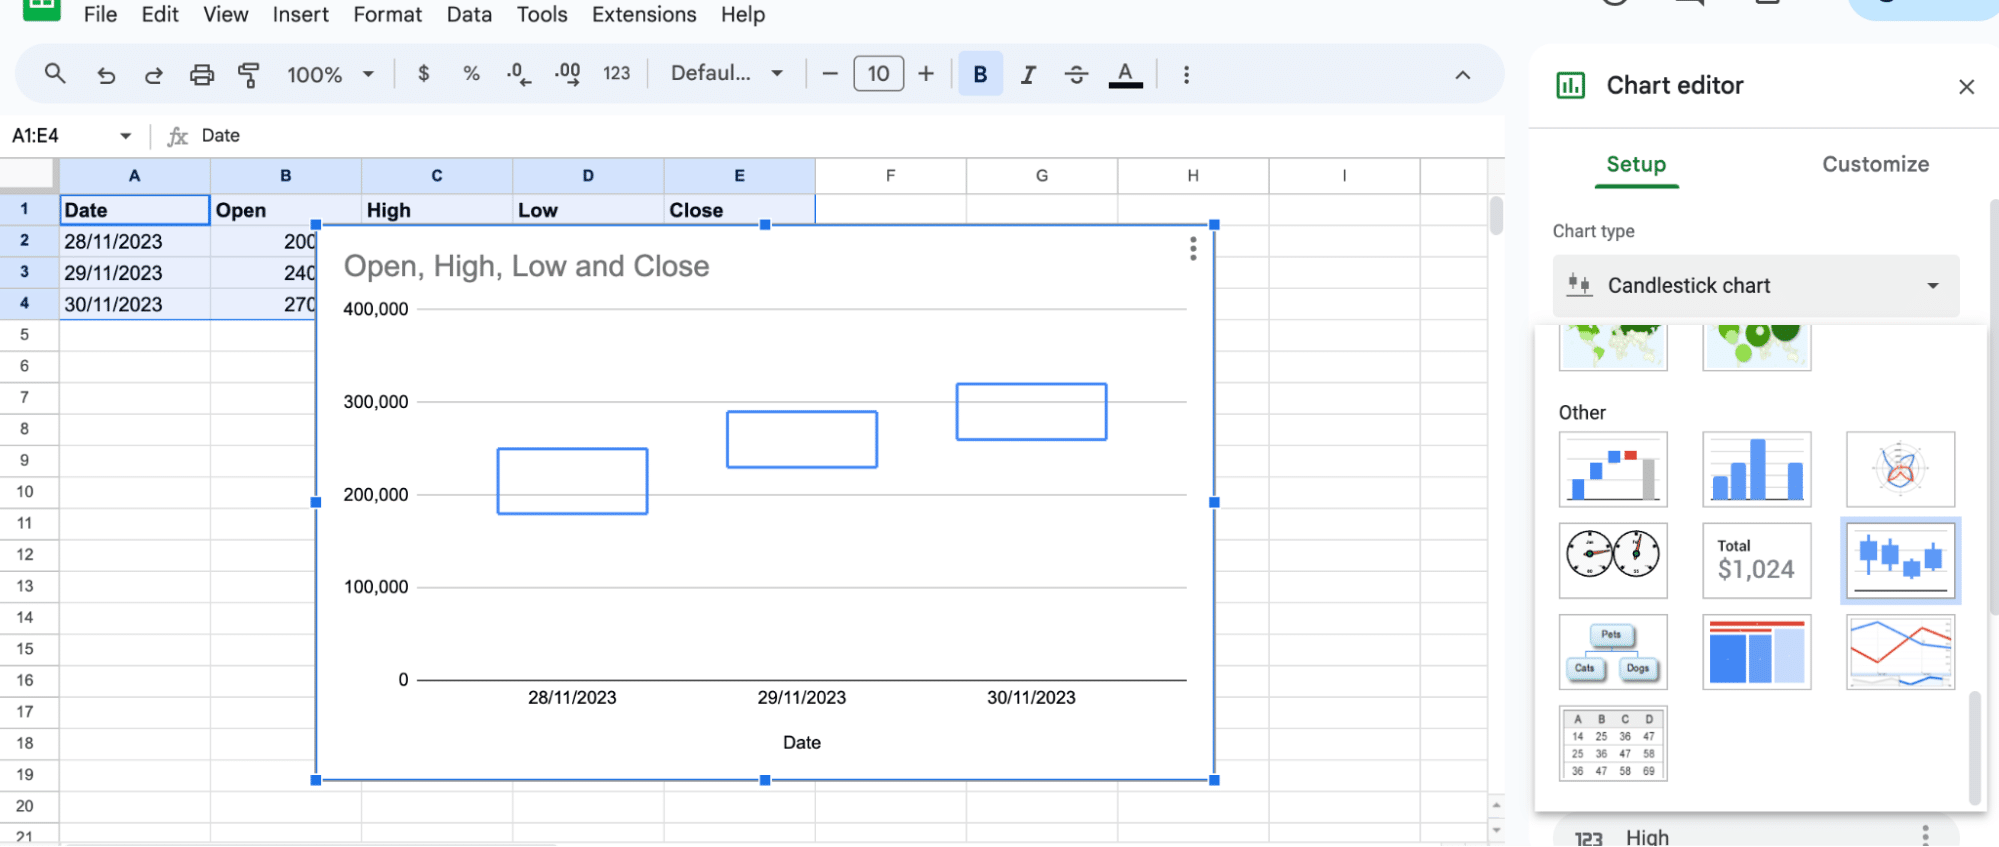 Choosing the Candlestick chart option from the dropdown menu in Google Sheets.